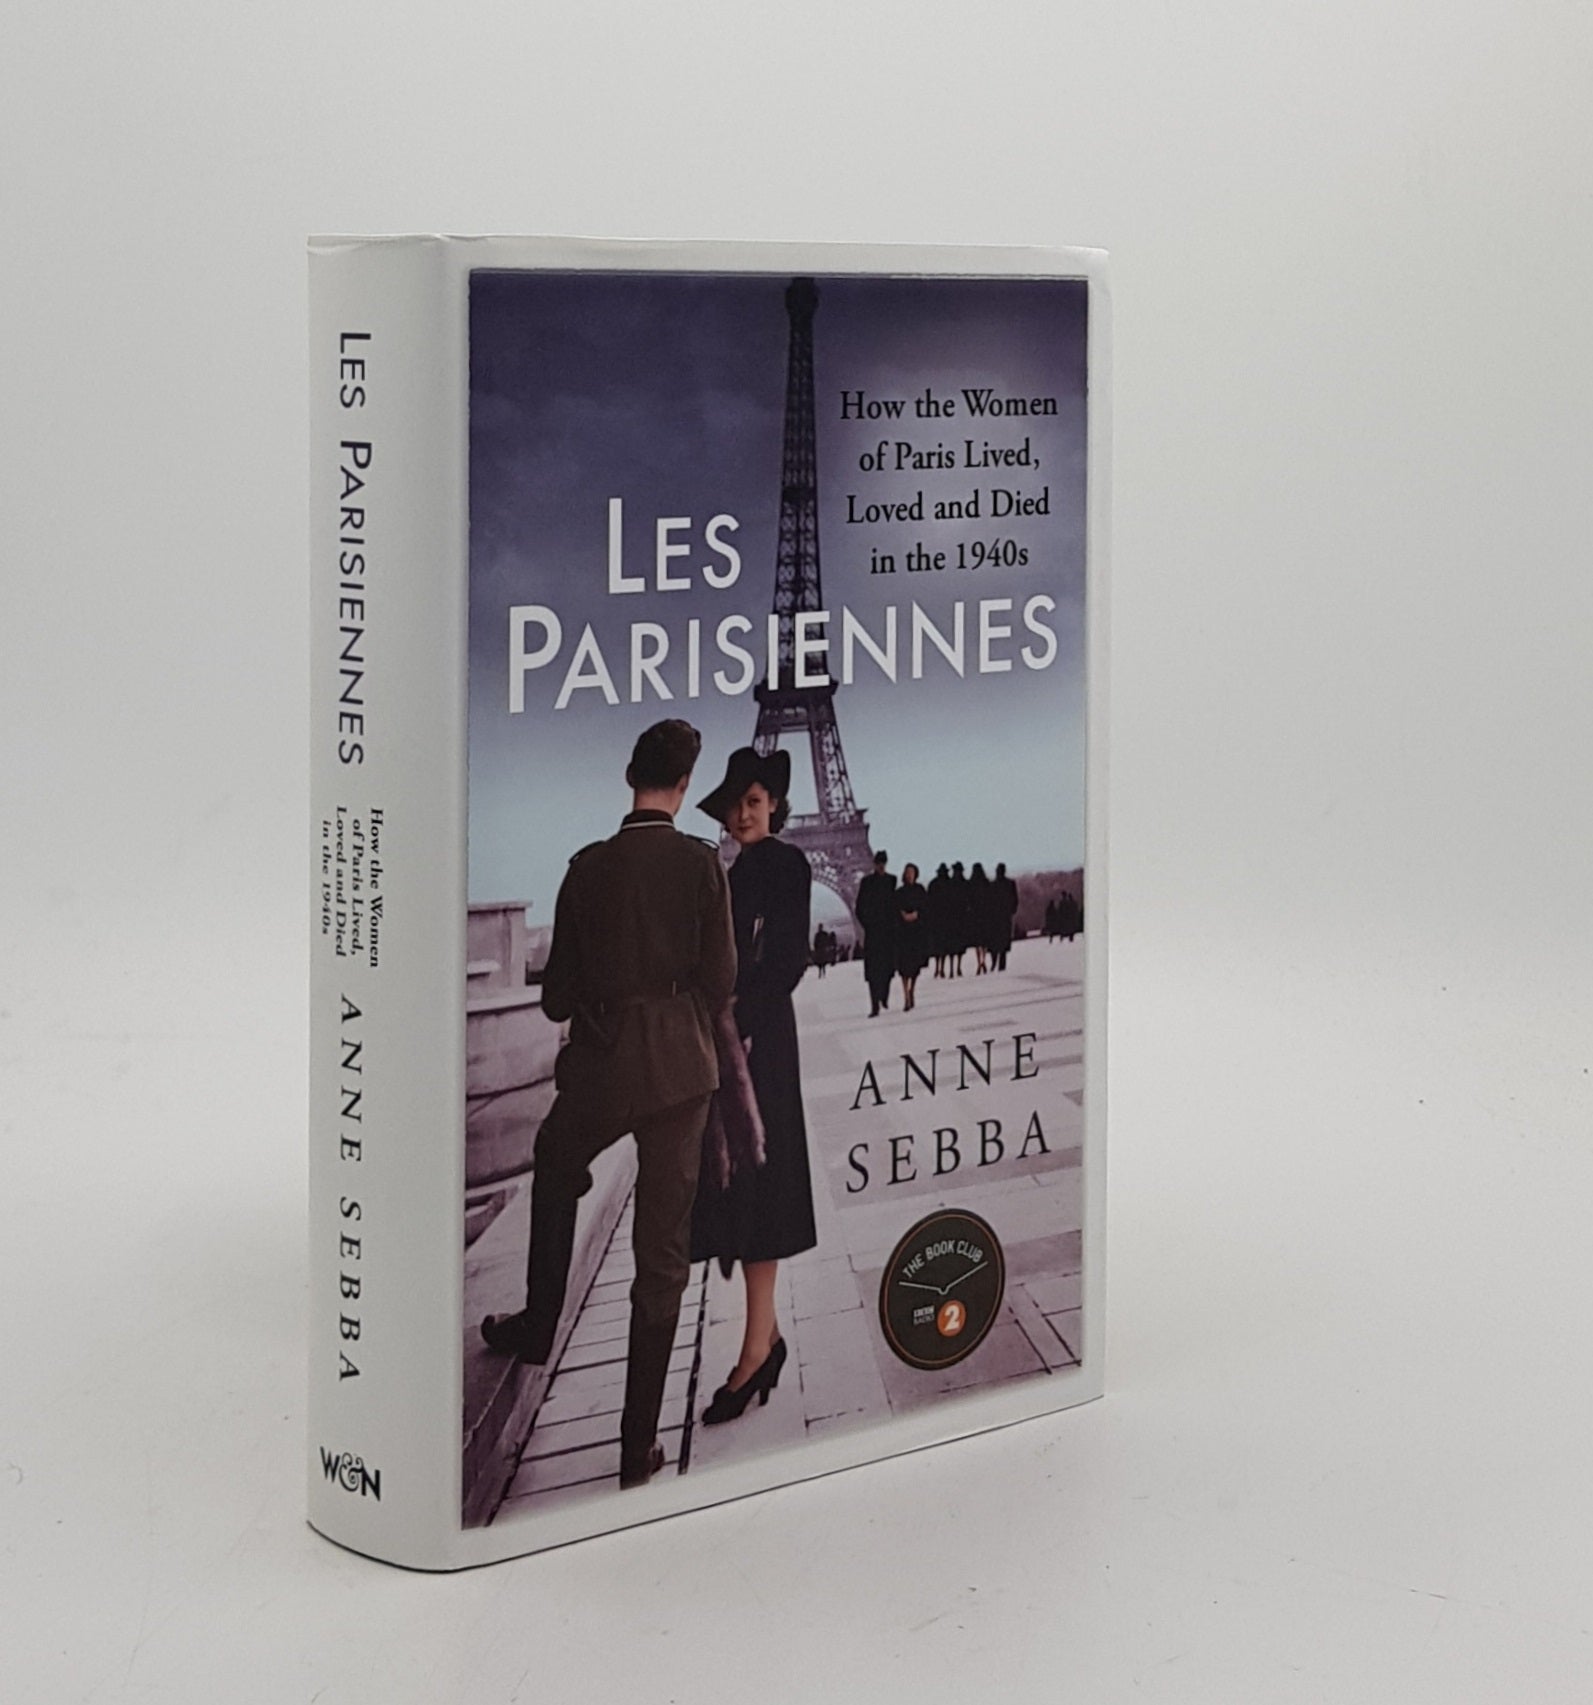 SEBBA Anne - Les Parisiennes How the Women of Paris Lived Loved and Died in the 1940s